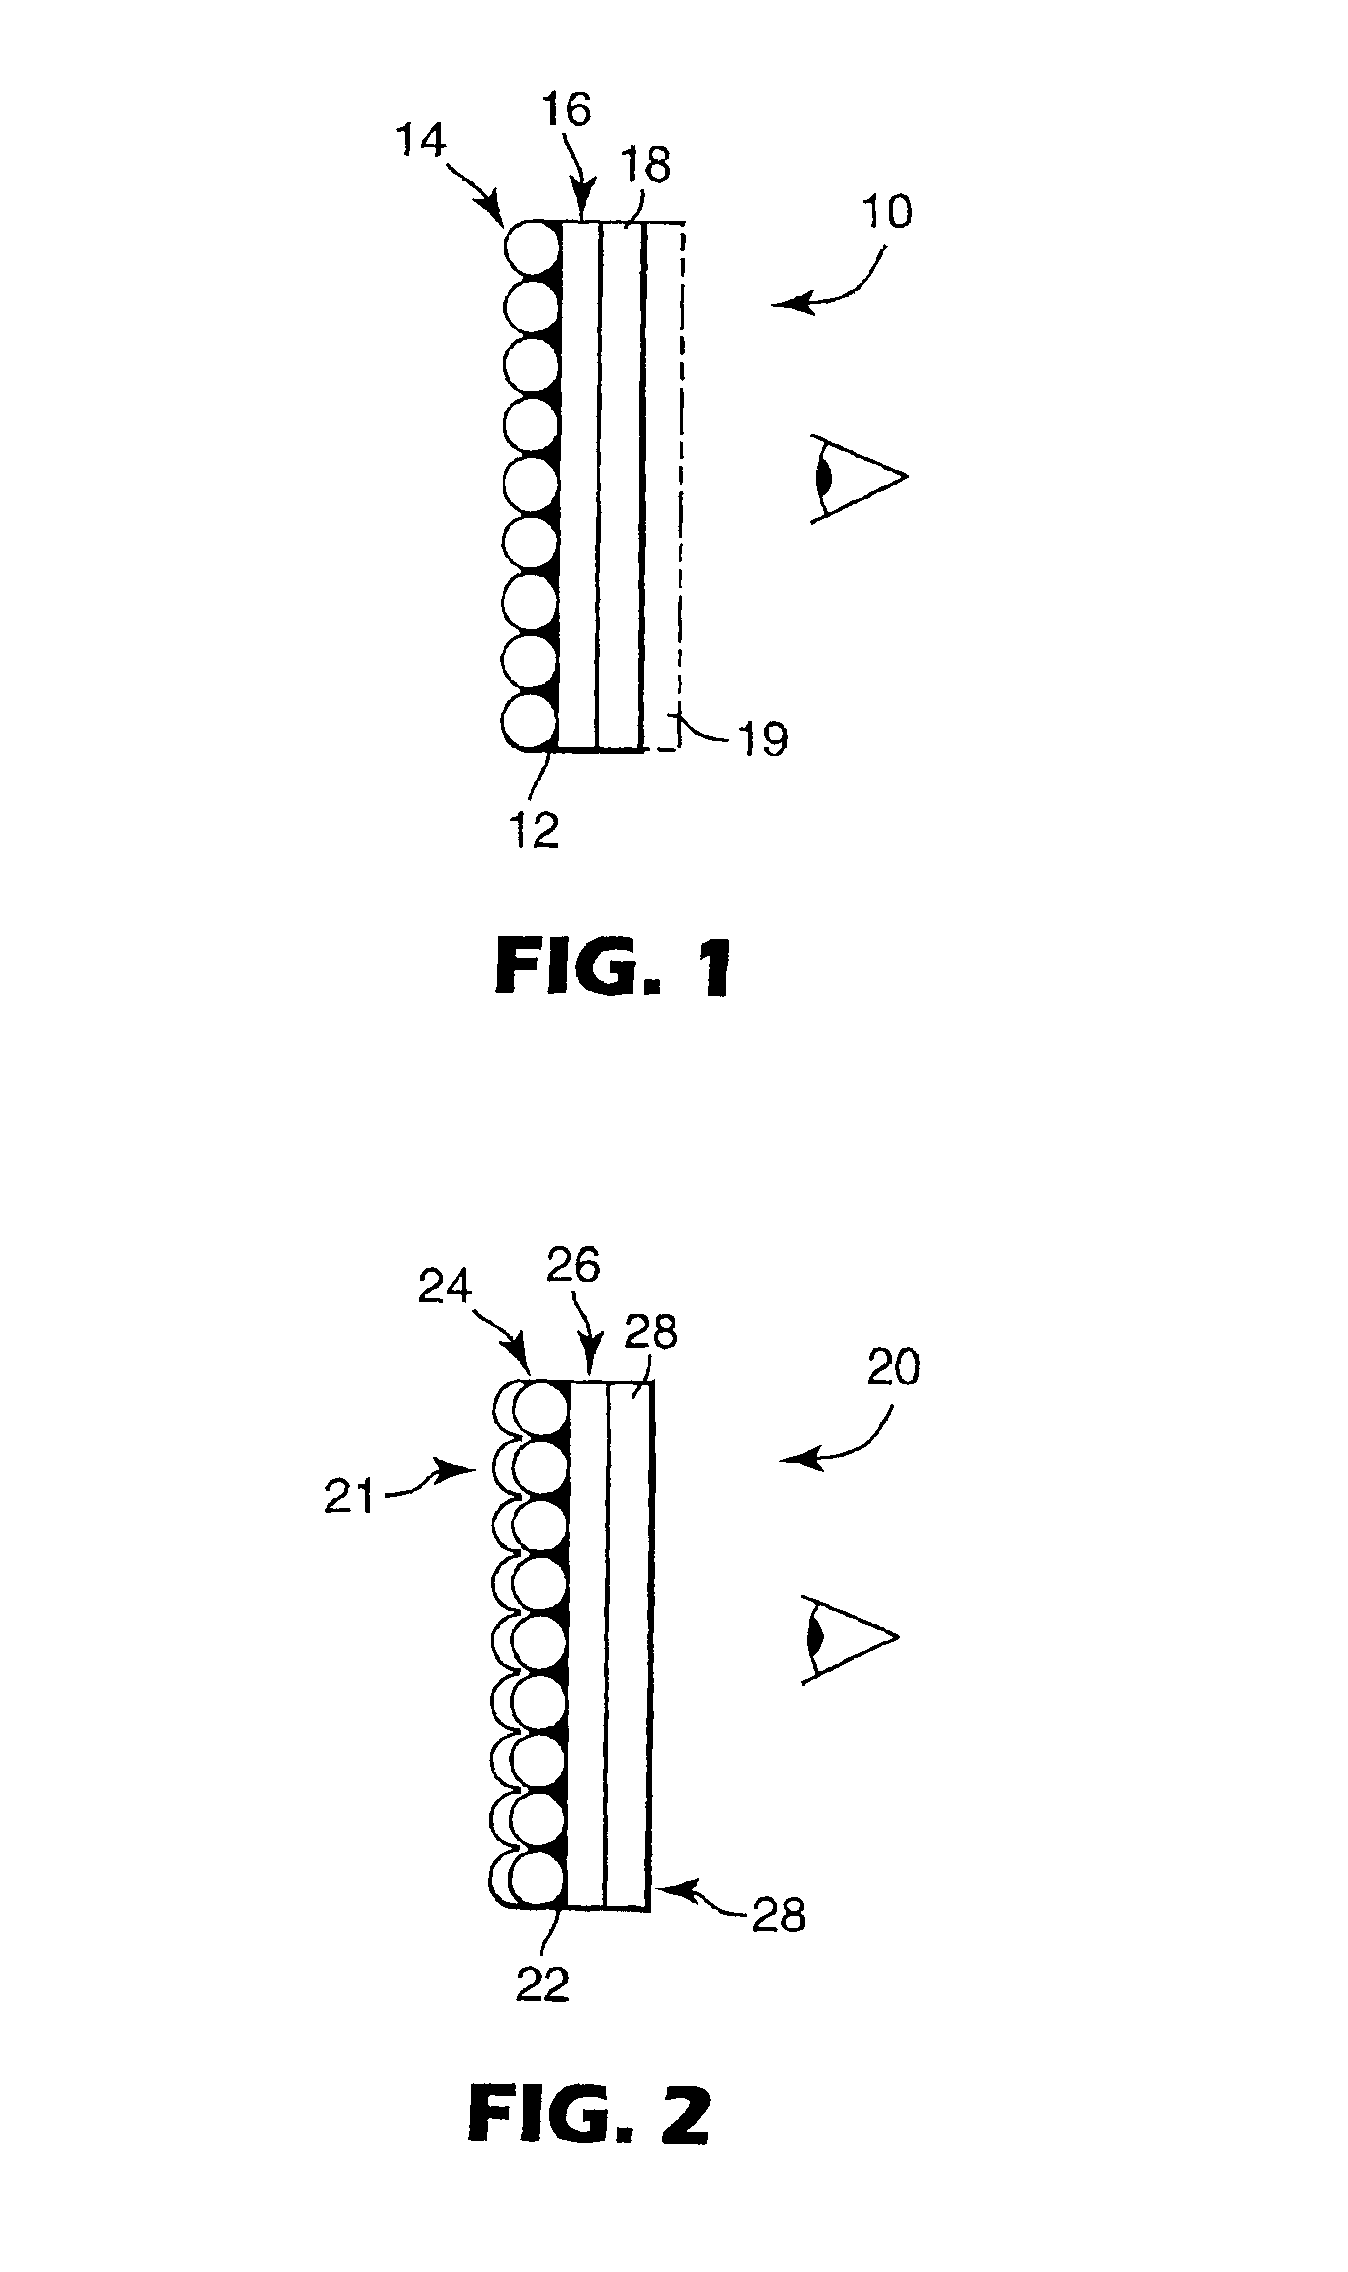 Screens and methods for displaying information